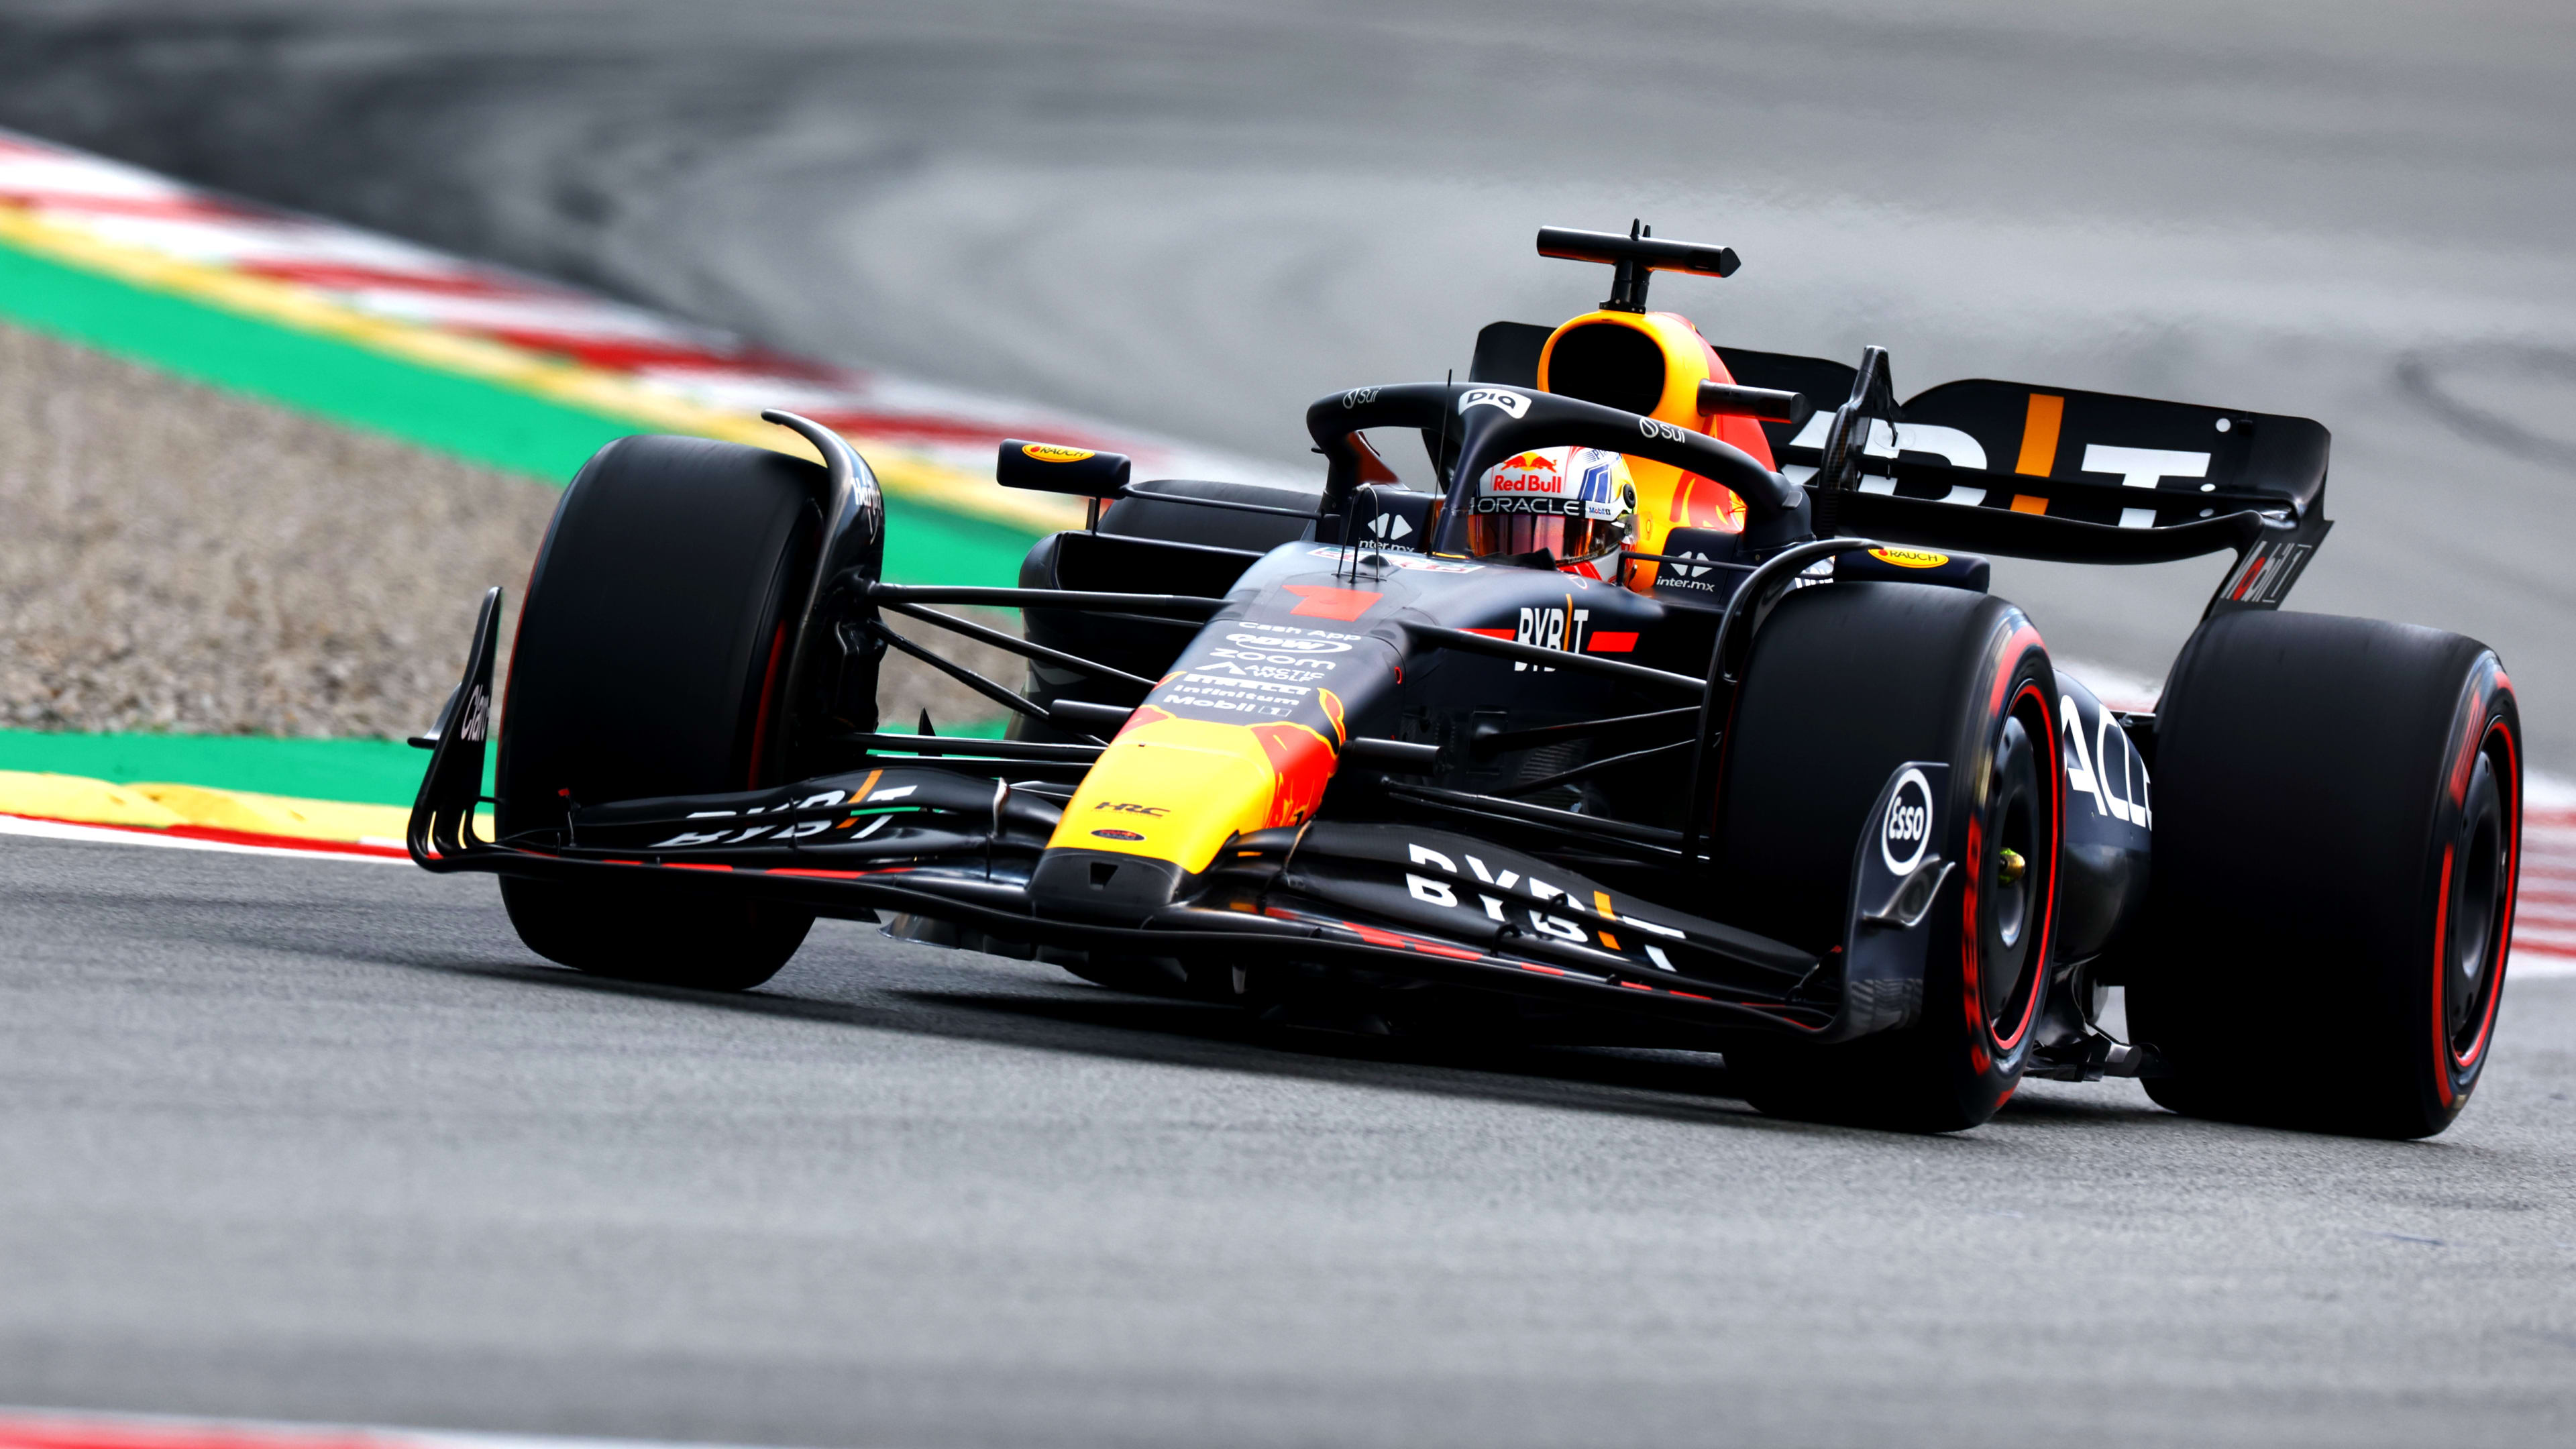 2023 Spanish Grand Prix FP3 report and highlights Verstappen leads Perez and Hamilton in rain-affected final practice session in Barcelona Formula 1®